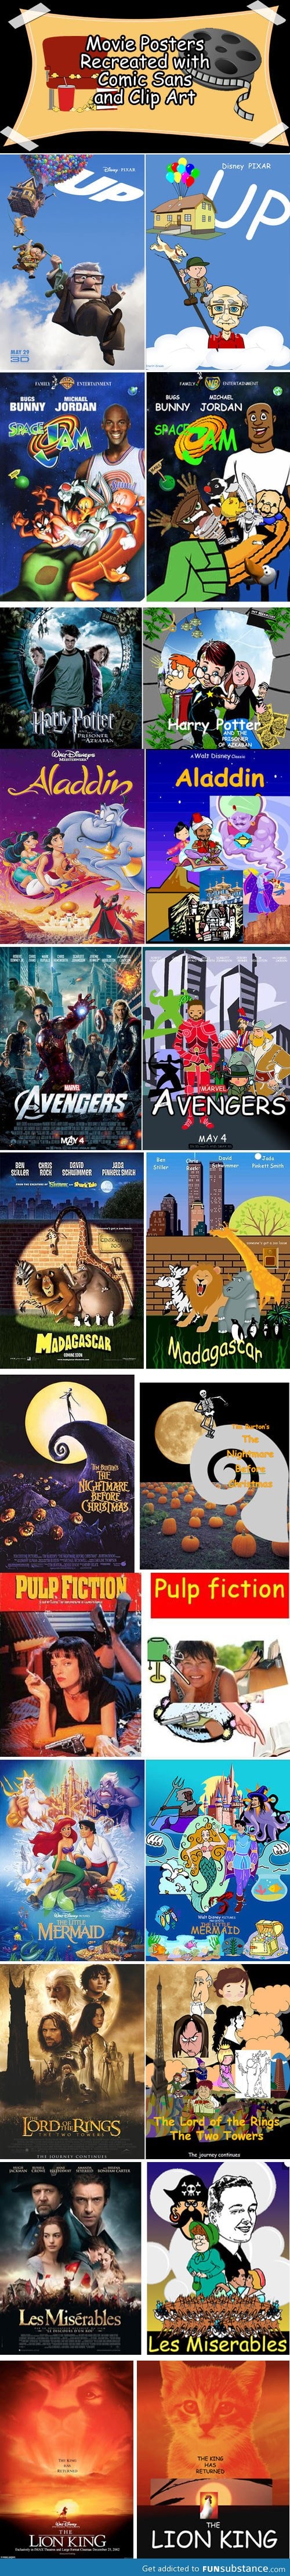 Movie posters recreated with comic sans and clip art